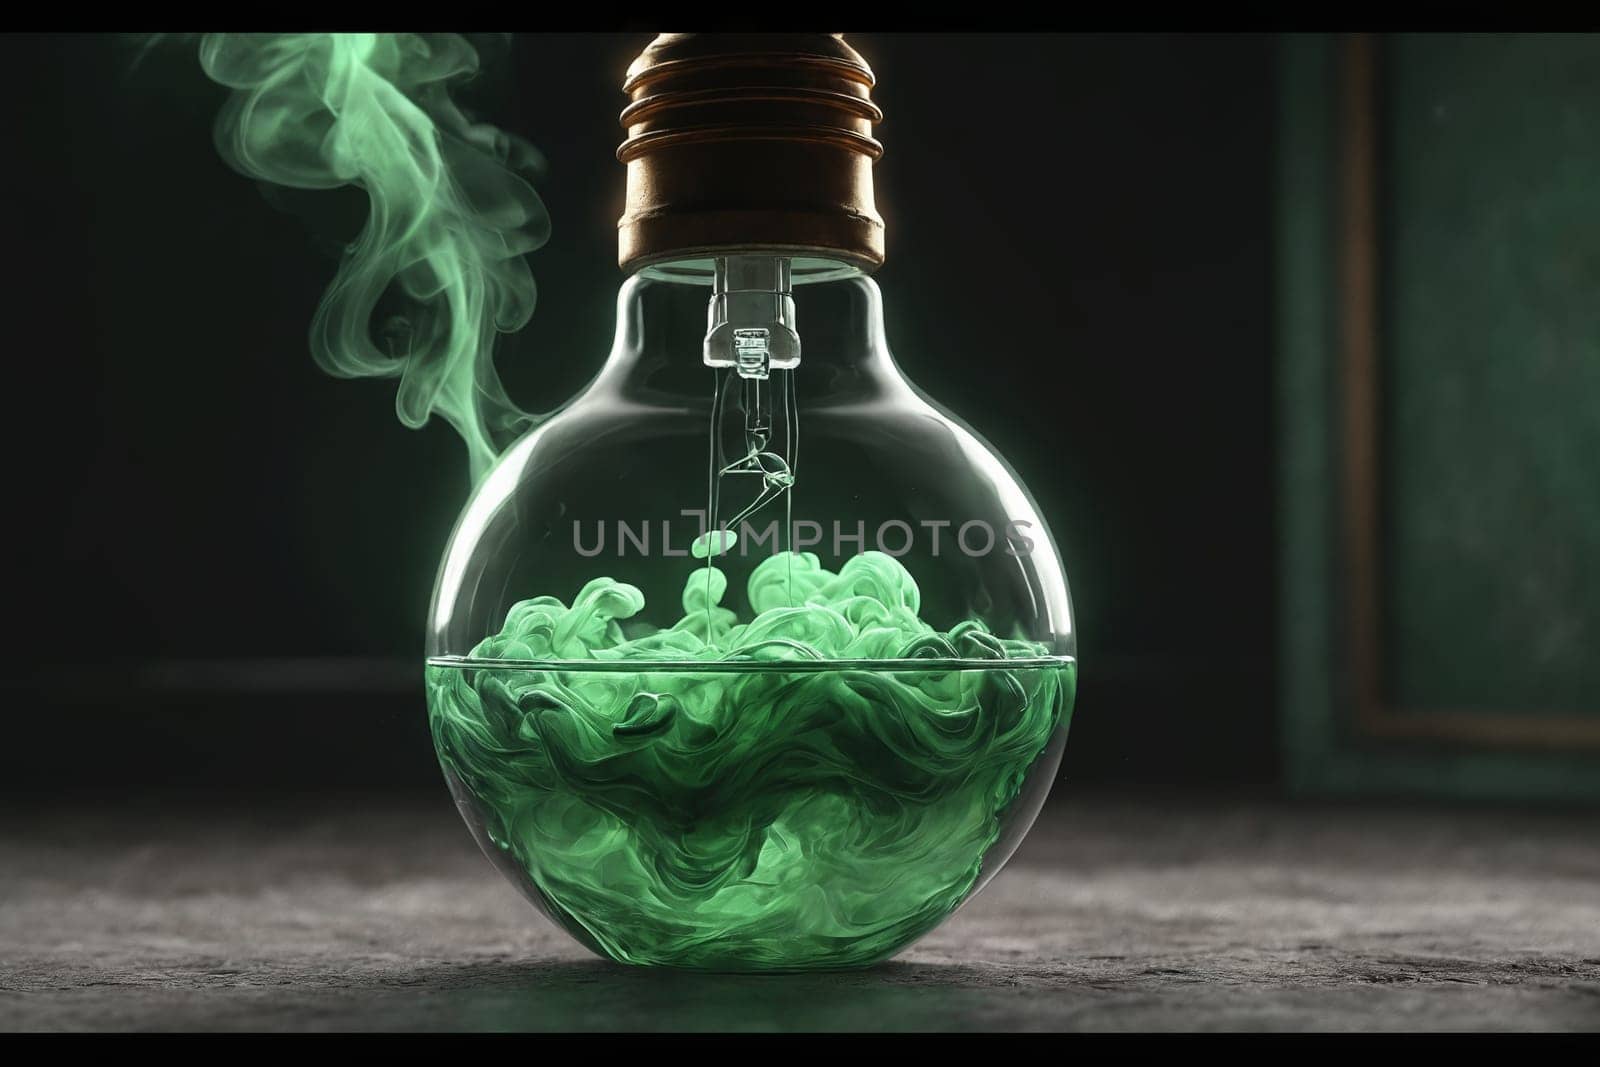 Witness the whimsical dance of green smoke within a light bulb that defies gravity, providing a moment of magic in mid-air.